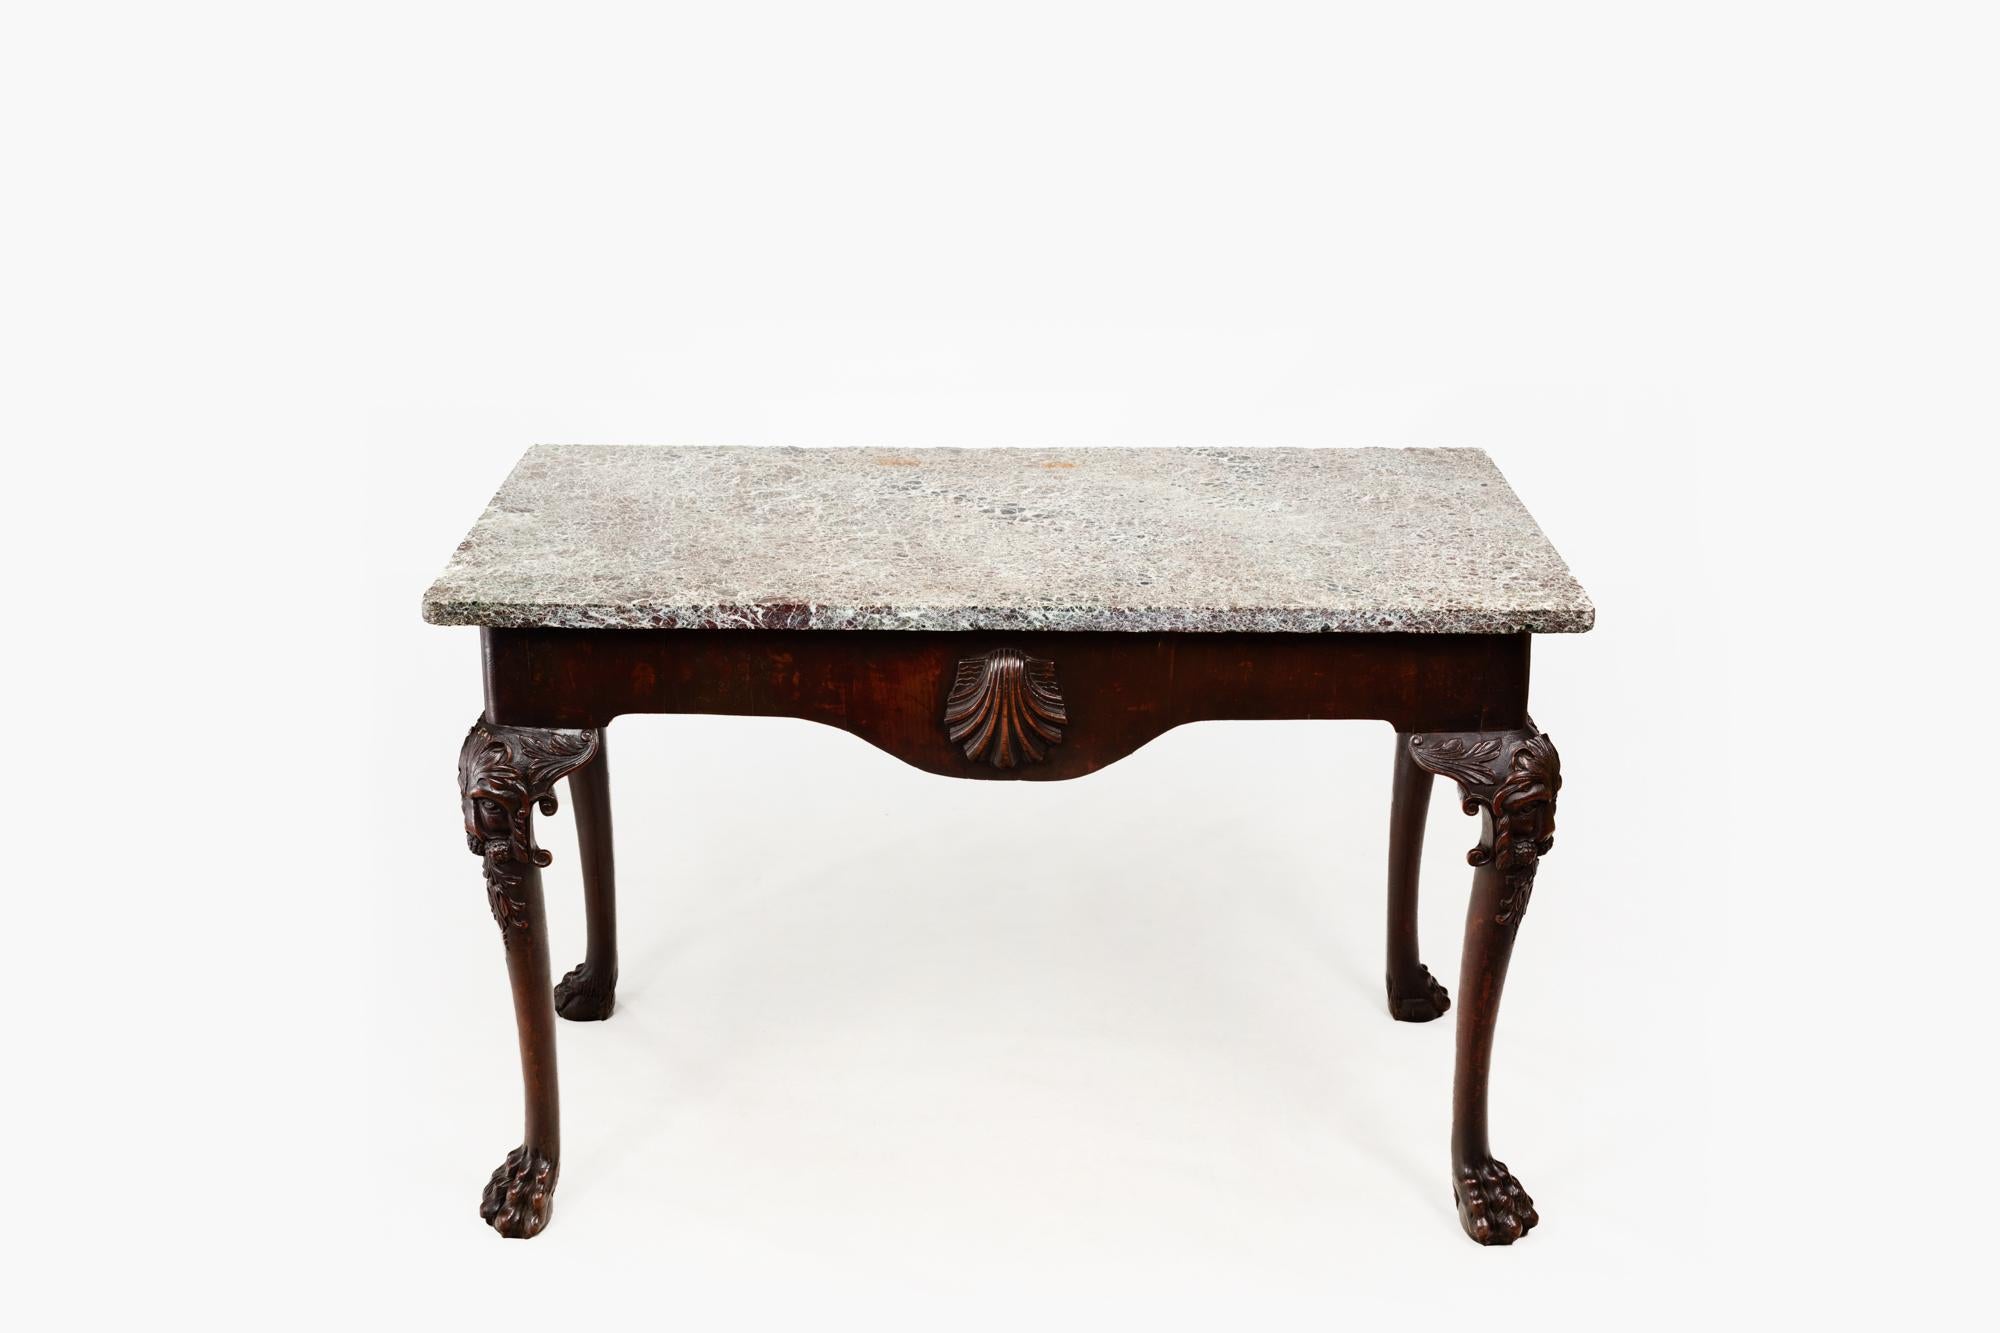 Hand-Carved 18th Century Irish Walnut Side Table With Marble Top For Sale